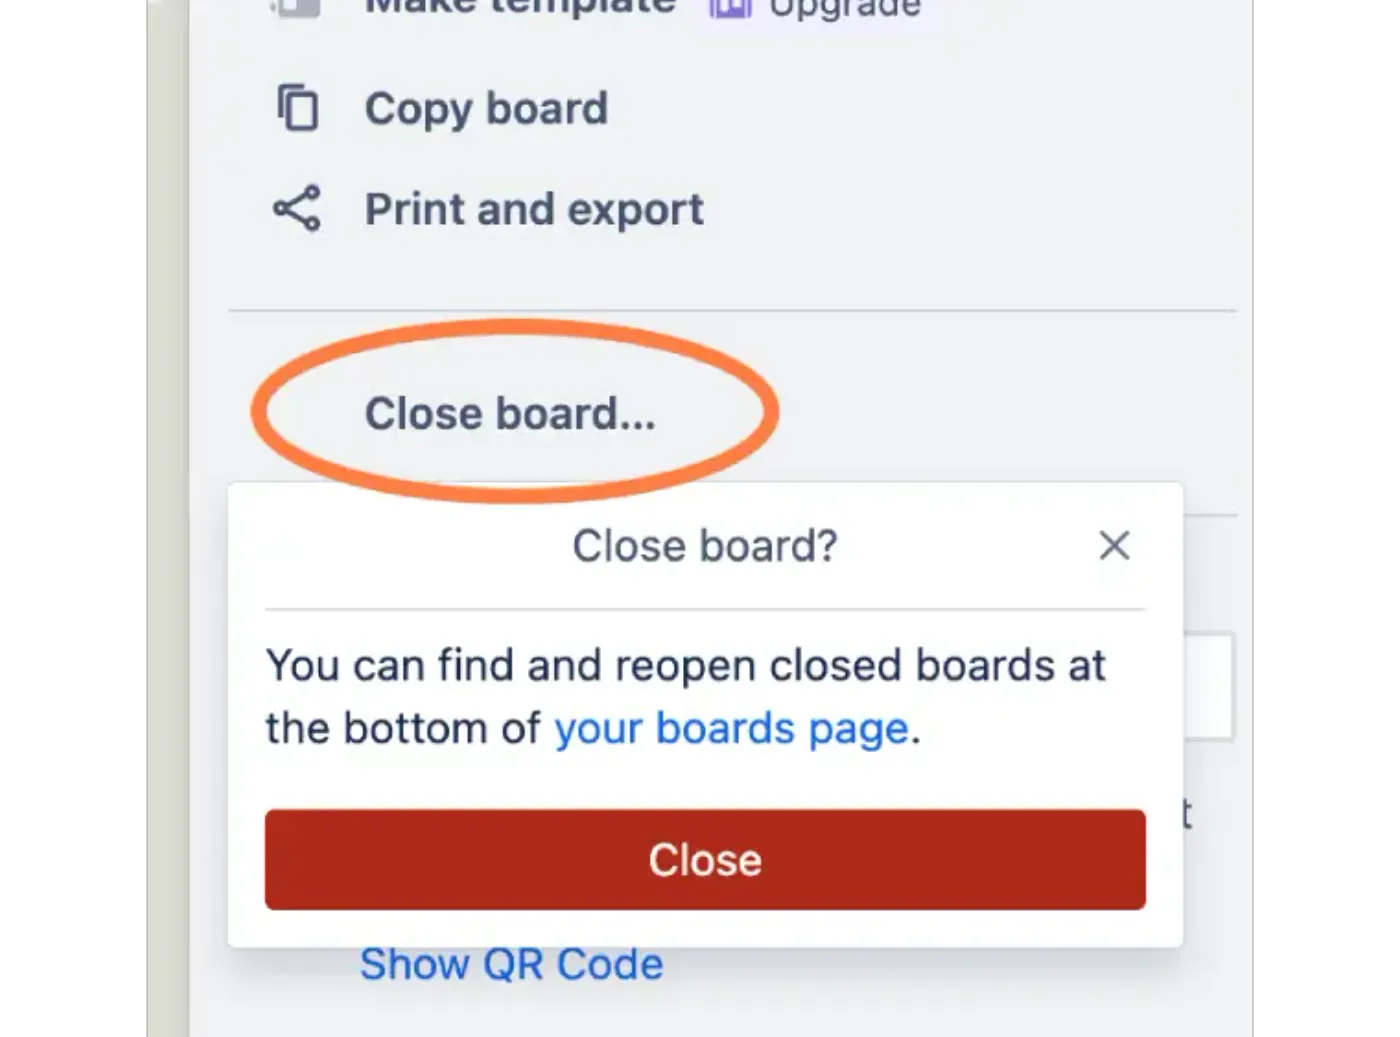 How To Perform Closing & Deleting Trello Boards?